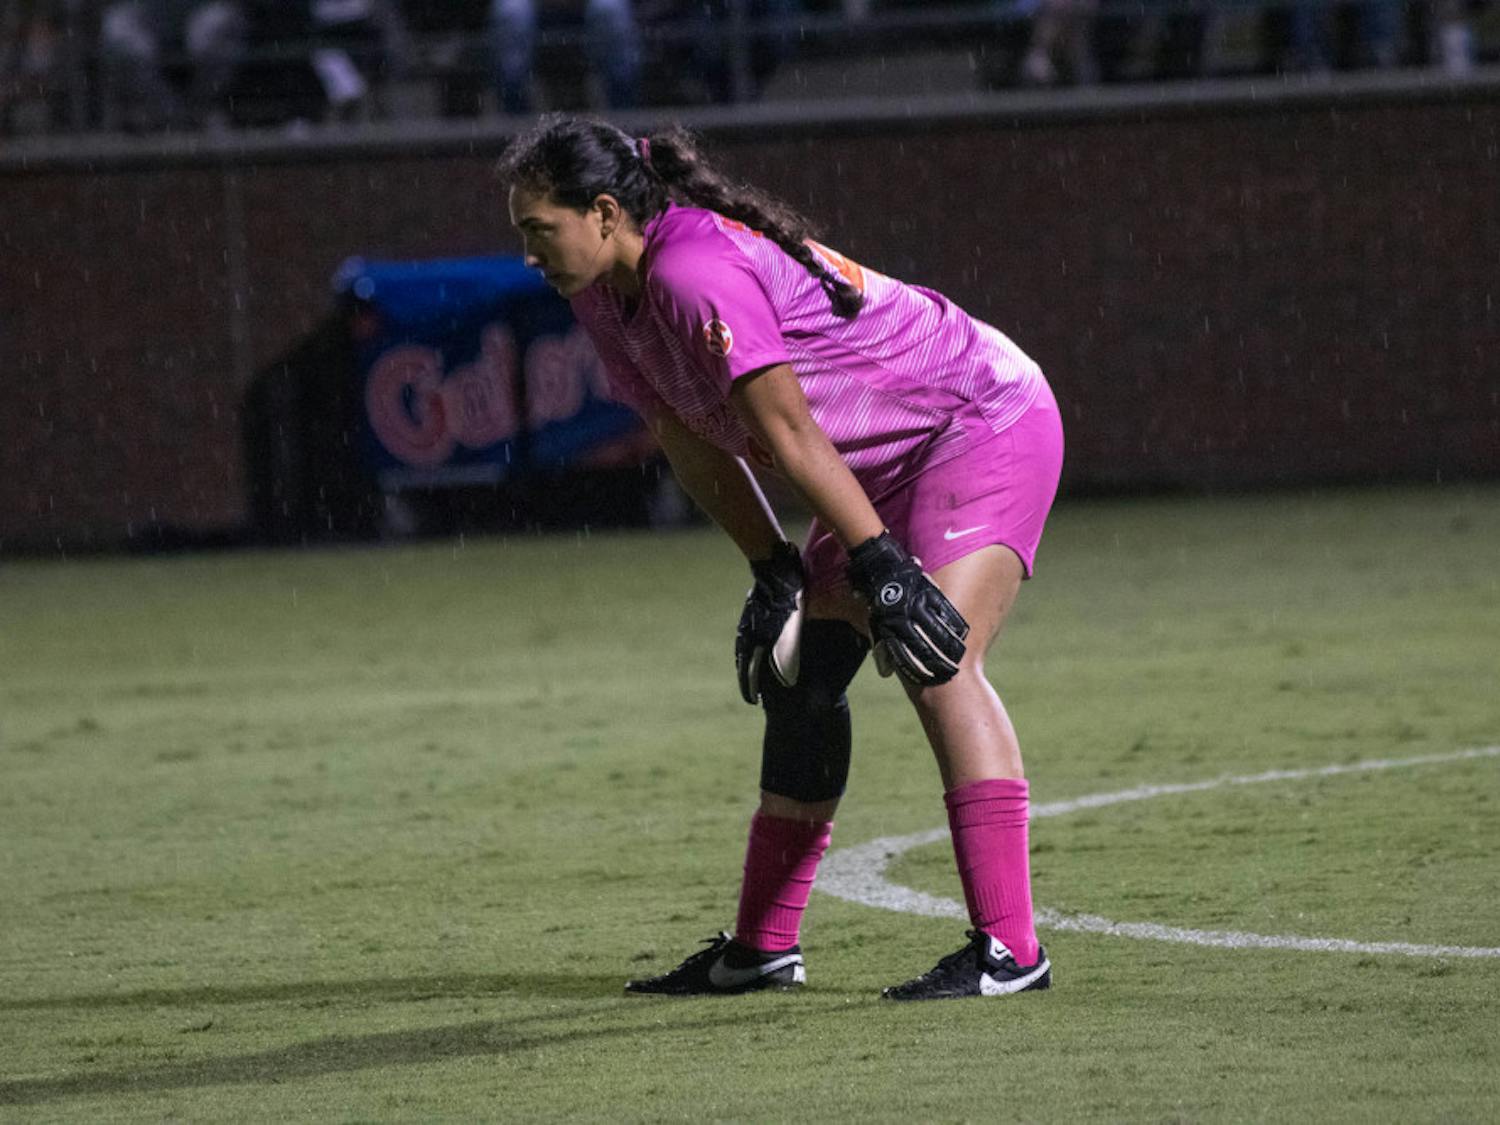 Goalie Susi Espinoza had five saves, but she couldn’t stop Georgia’s game-winning 89th-minute goal, which cost UF a division title.